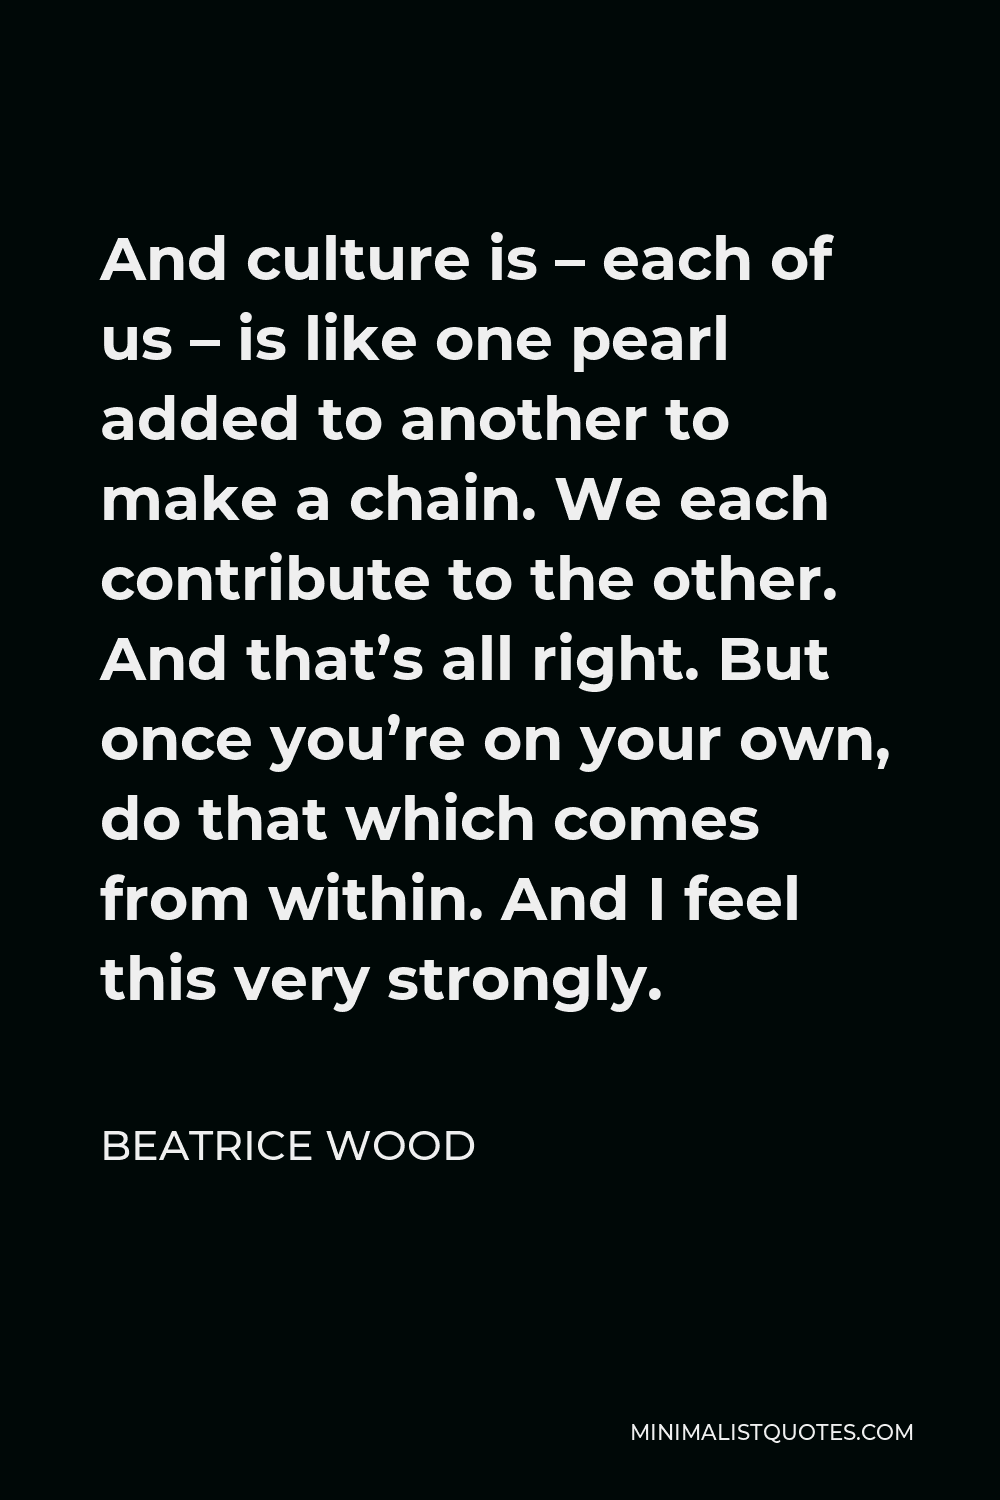 Beatrice Wood Quote - And culture is – each of us – is like one pearl added to another to make a chain. We each contribute to the other. And that’s all right. But once you’re on your own, do that which comes from within. And I feel this very strongly.